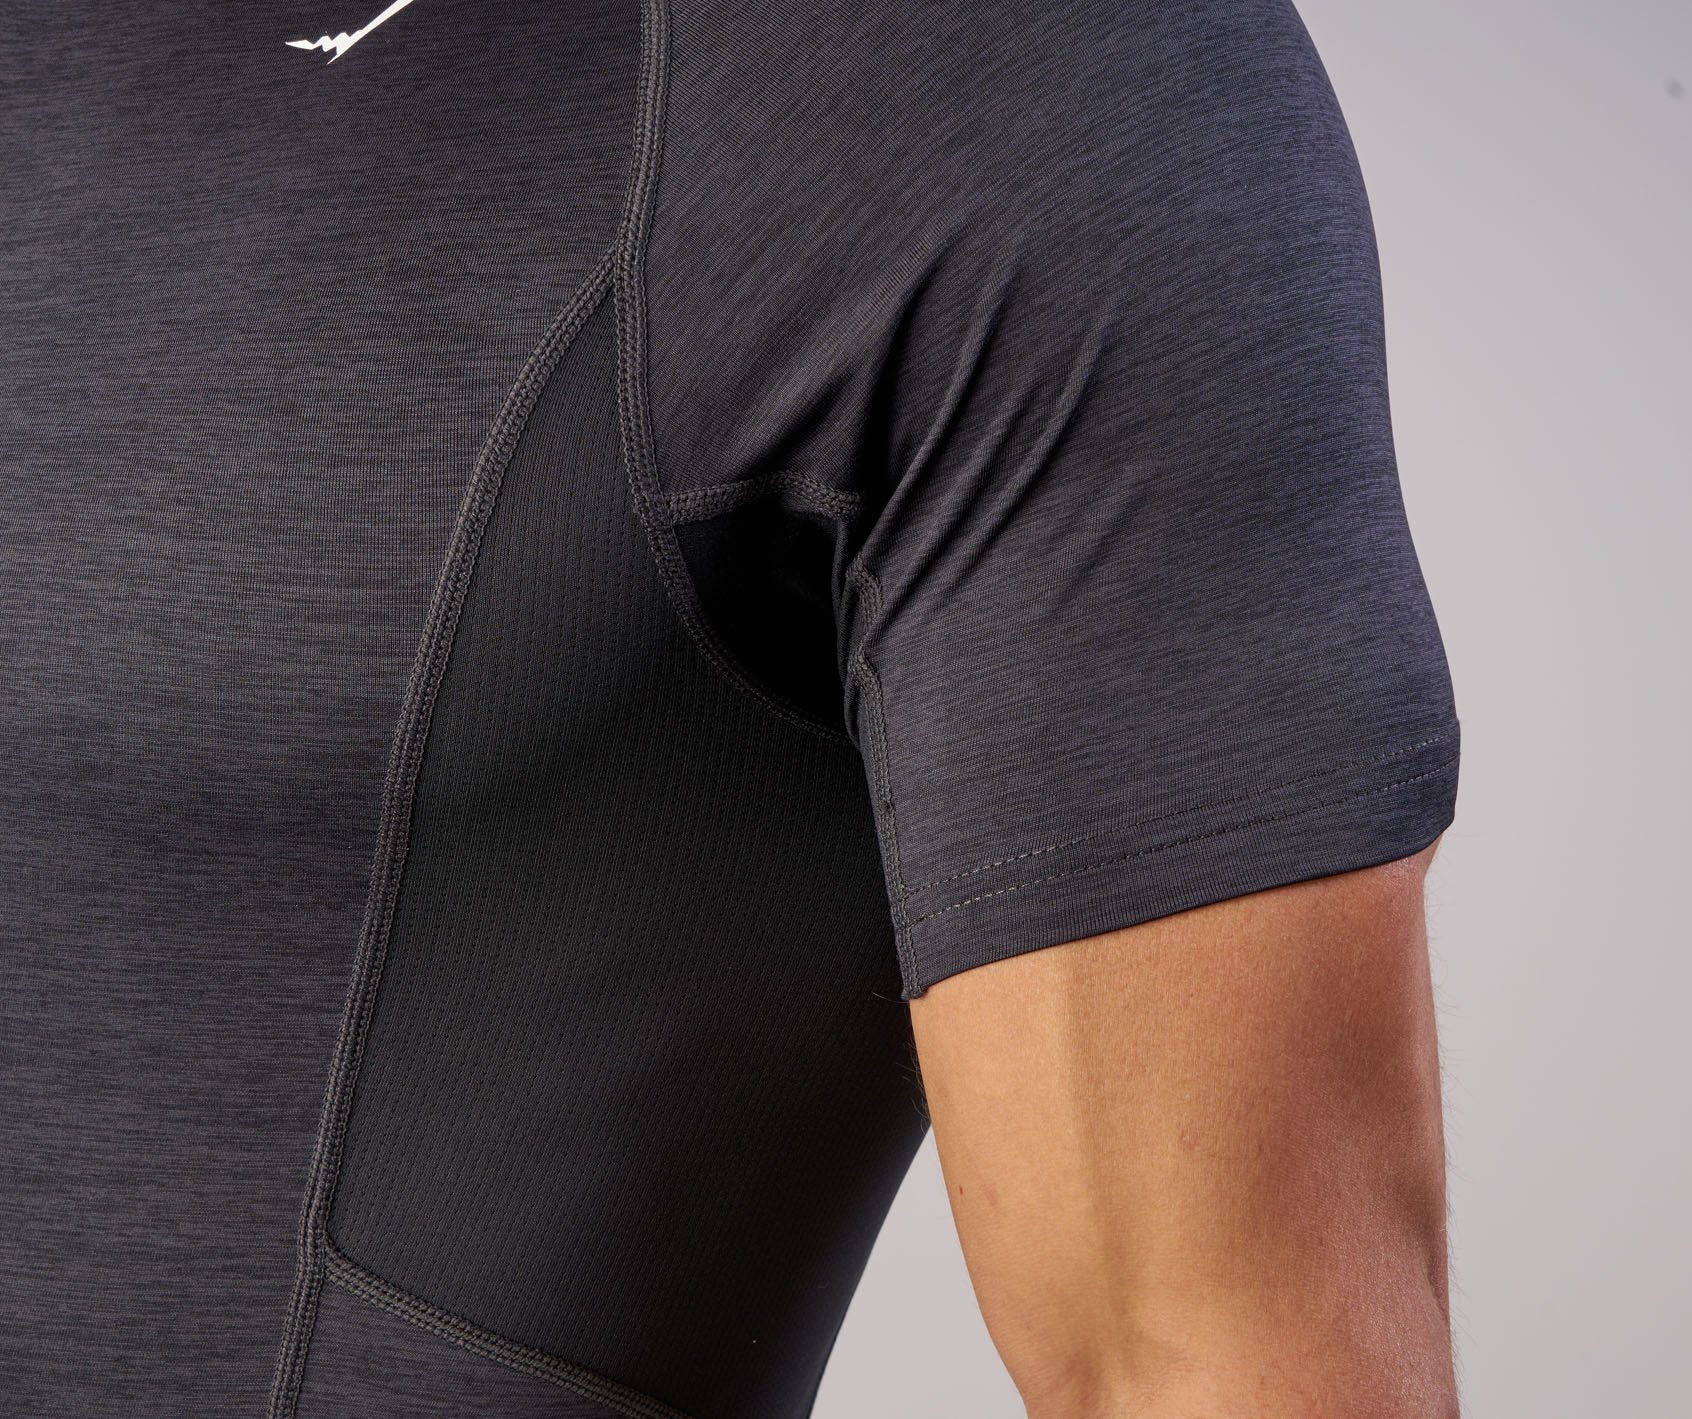 Element Baselayer Short Sleeve Top in Black Marl - view 5